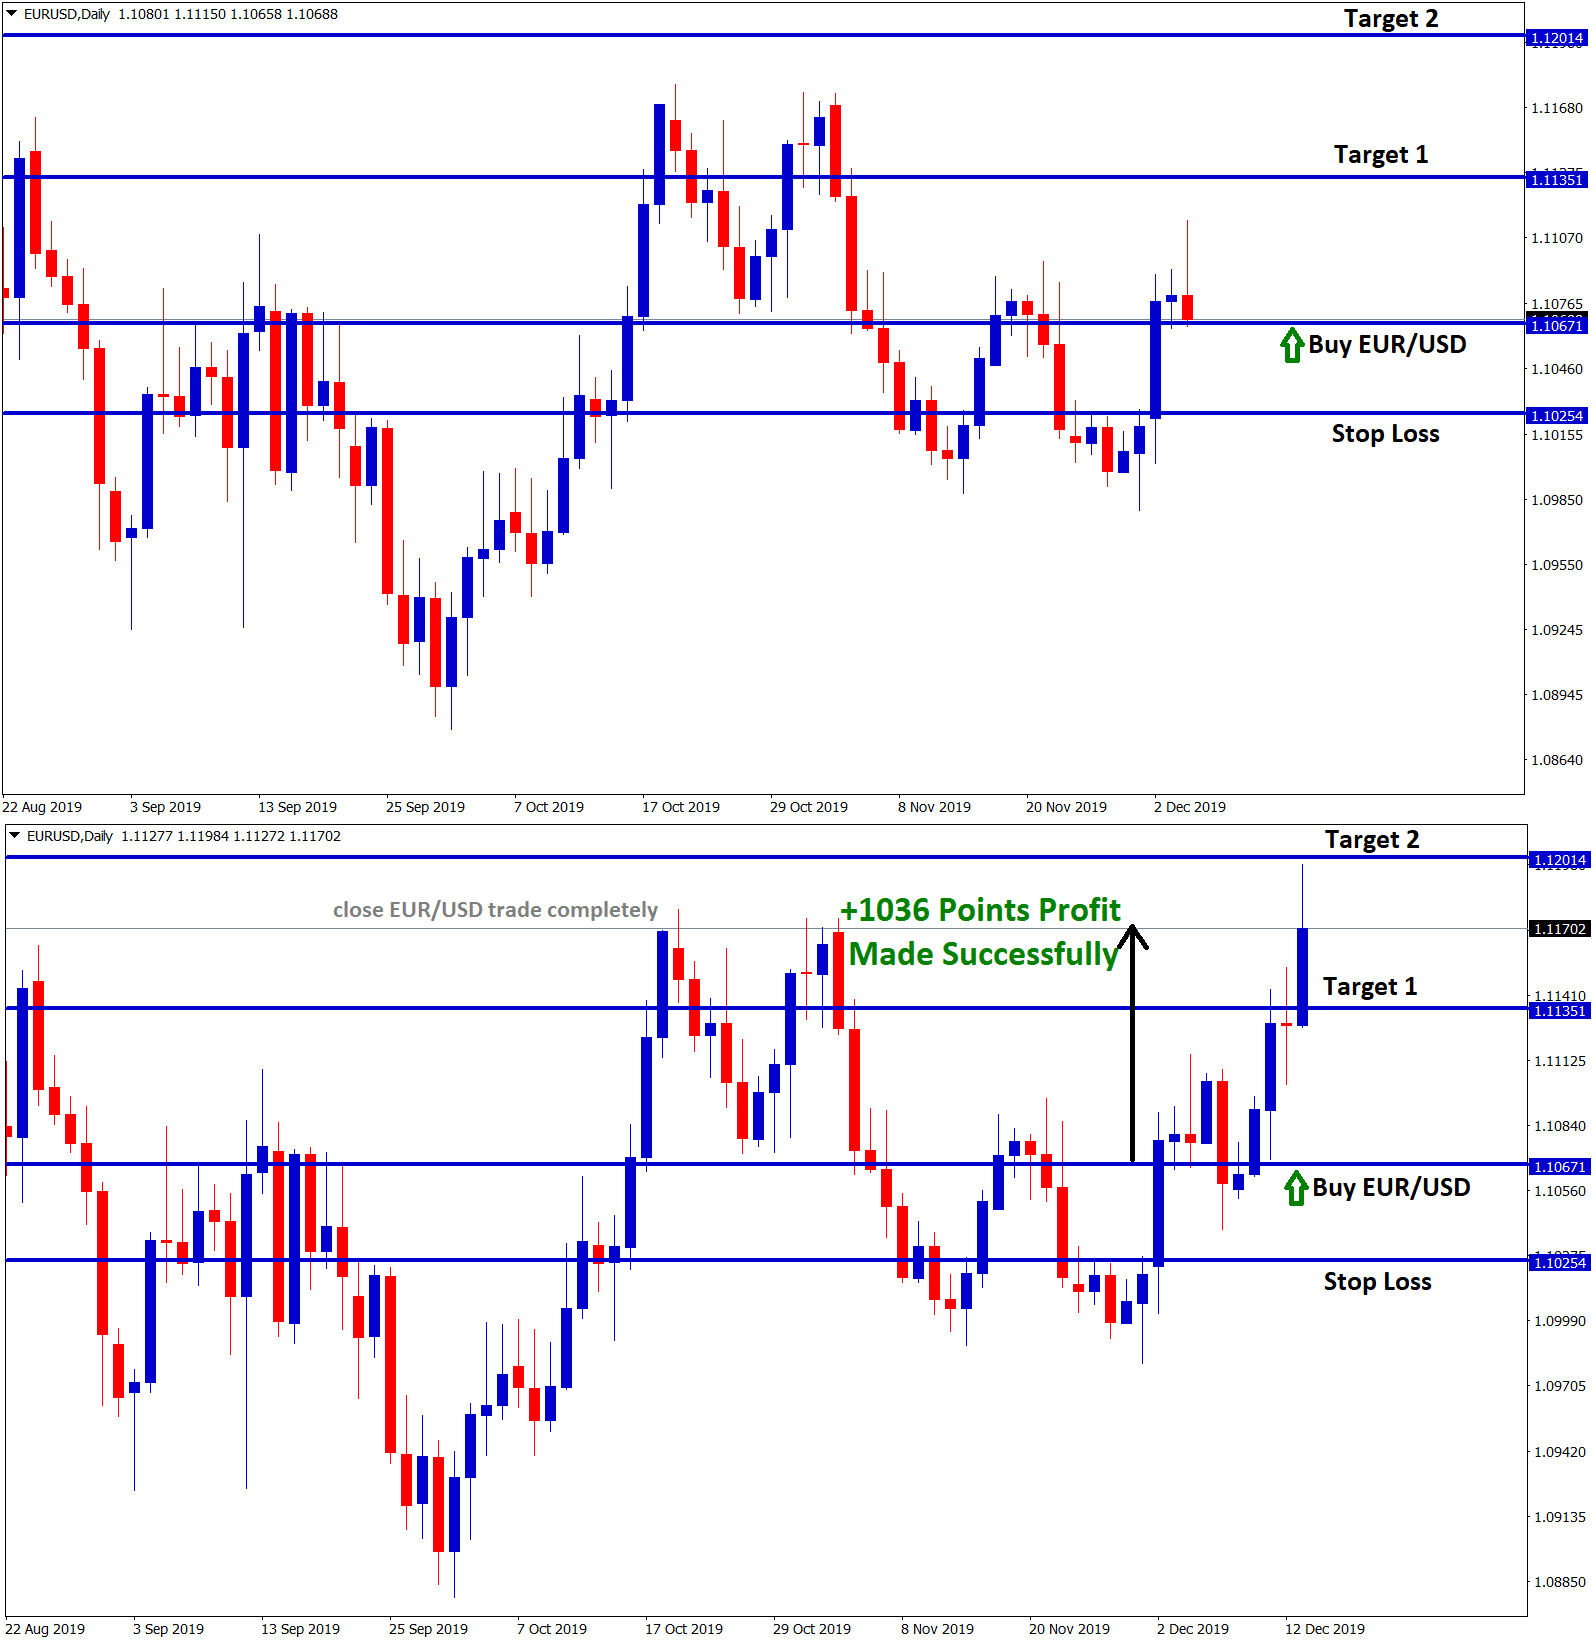 Eur usd reached the take profit in daily chart